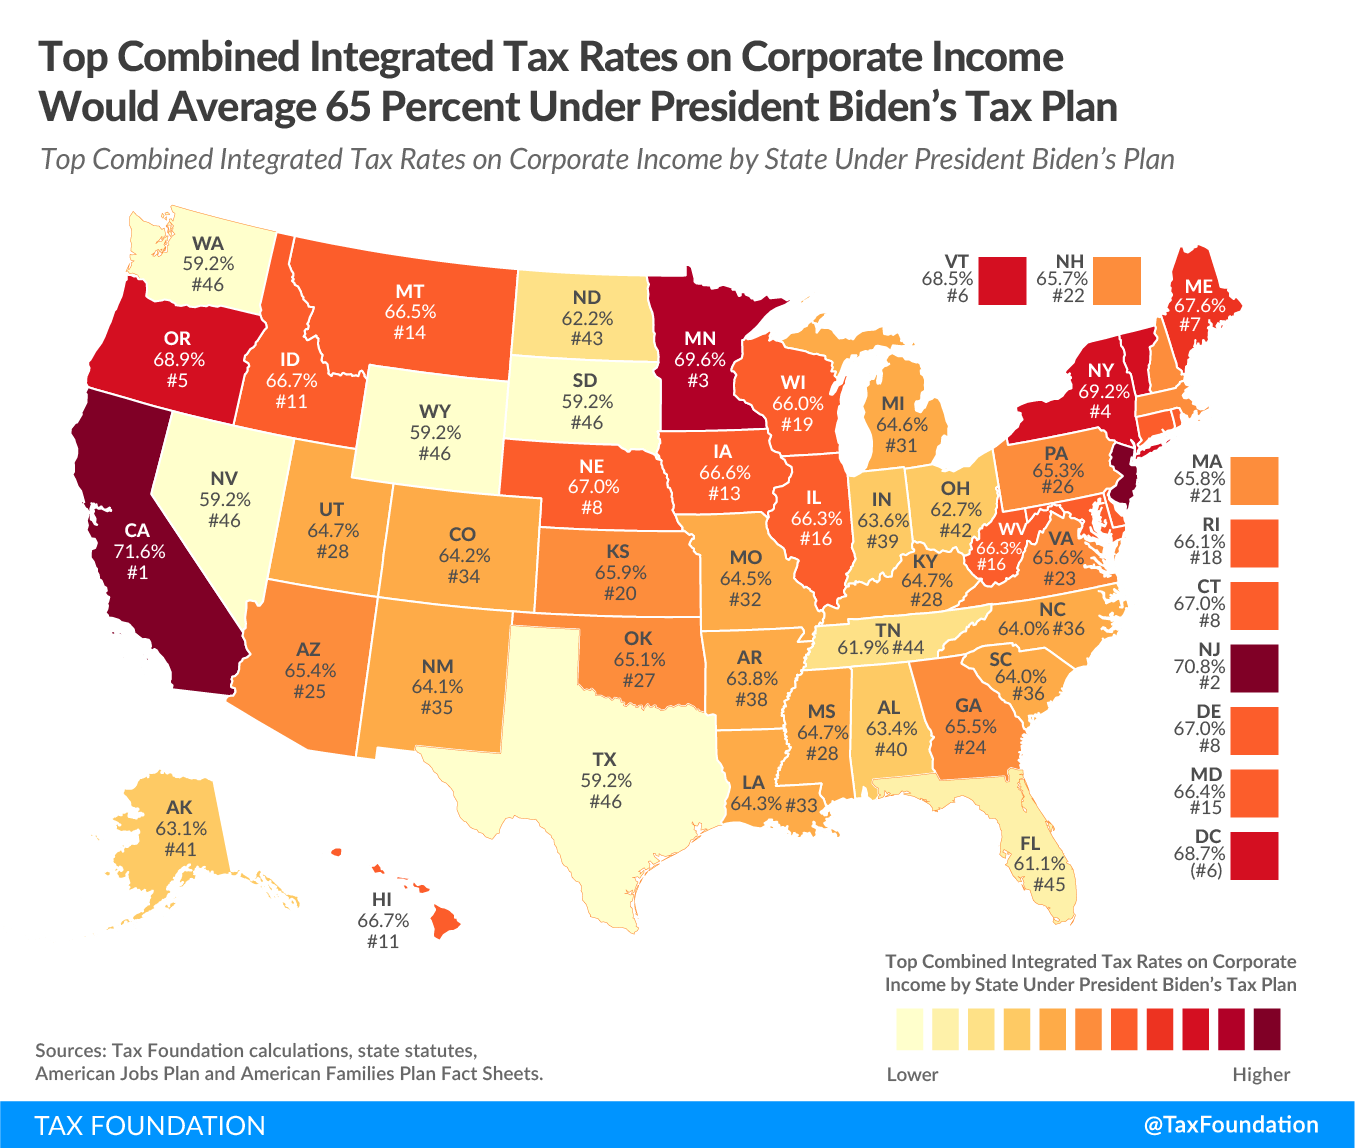 Biden corporate income tax proposals U.S. Top Combined Integrated Tax Rate on Corporate Income Would Become Highest in the OECD under Biden tax plan, top combined integrated tax rates on corporate income would average 65 percent under President Biden's tax plan